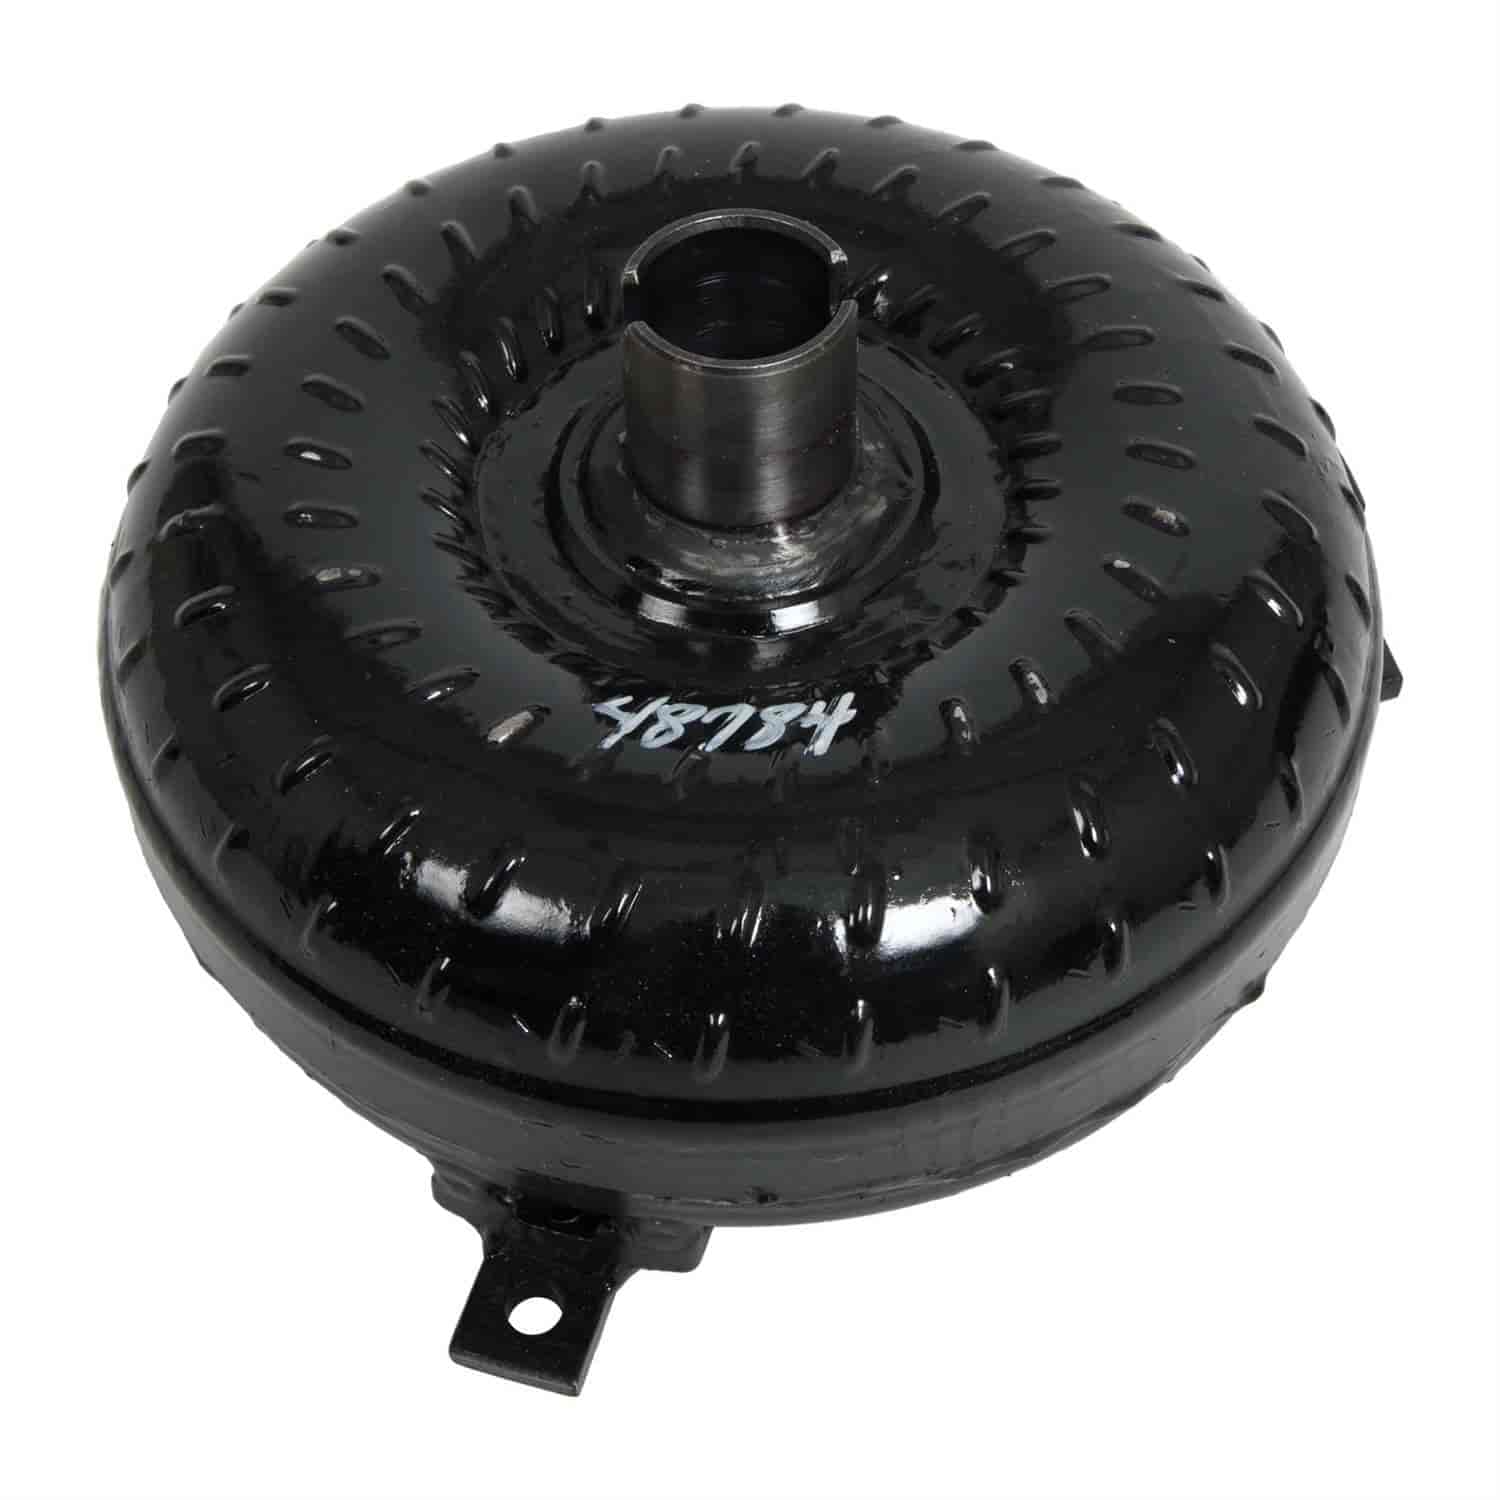 Outlaw Torque Converter for GM 700R4  Transmission, Stall Range: 3,200-3,500 RPM, Diameter: 9.600 in., Lock Up: No